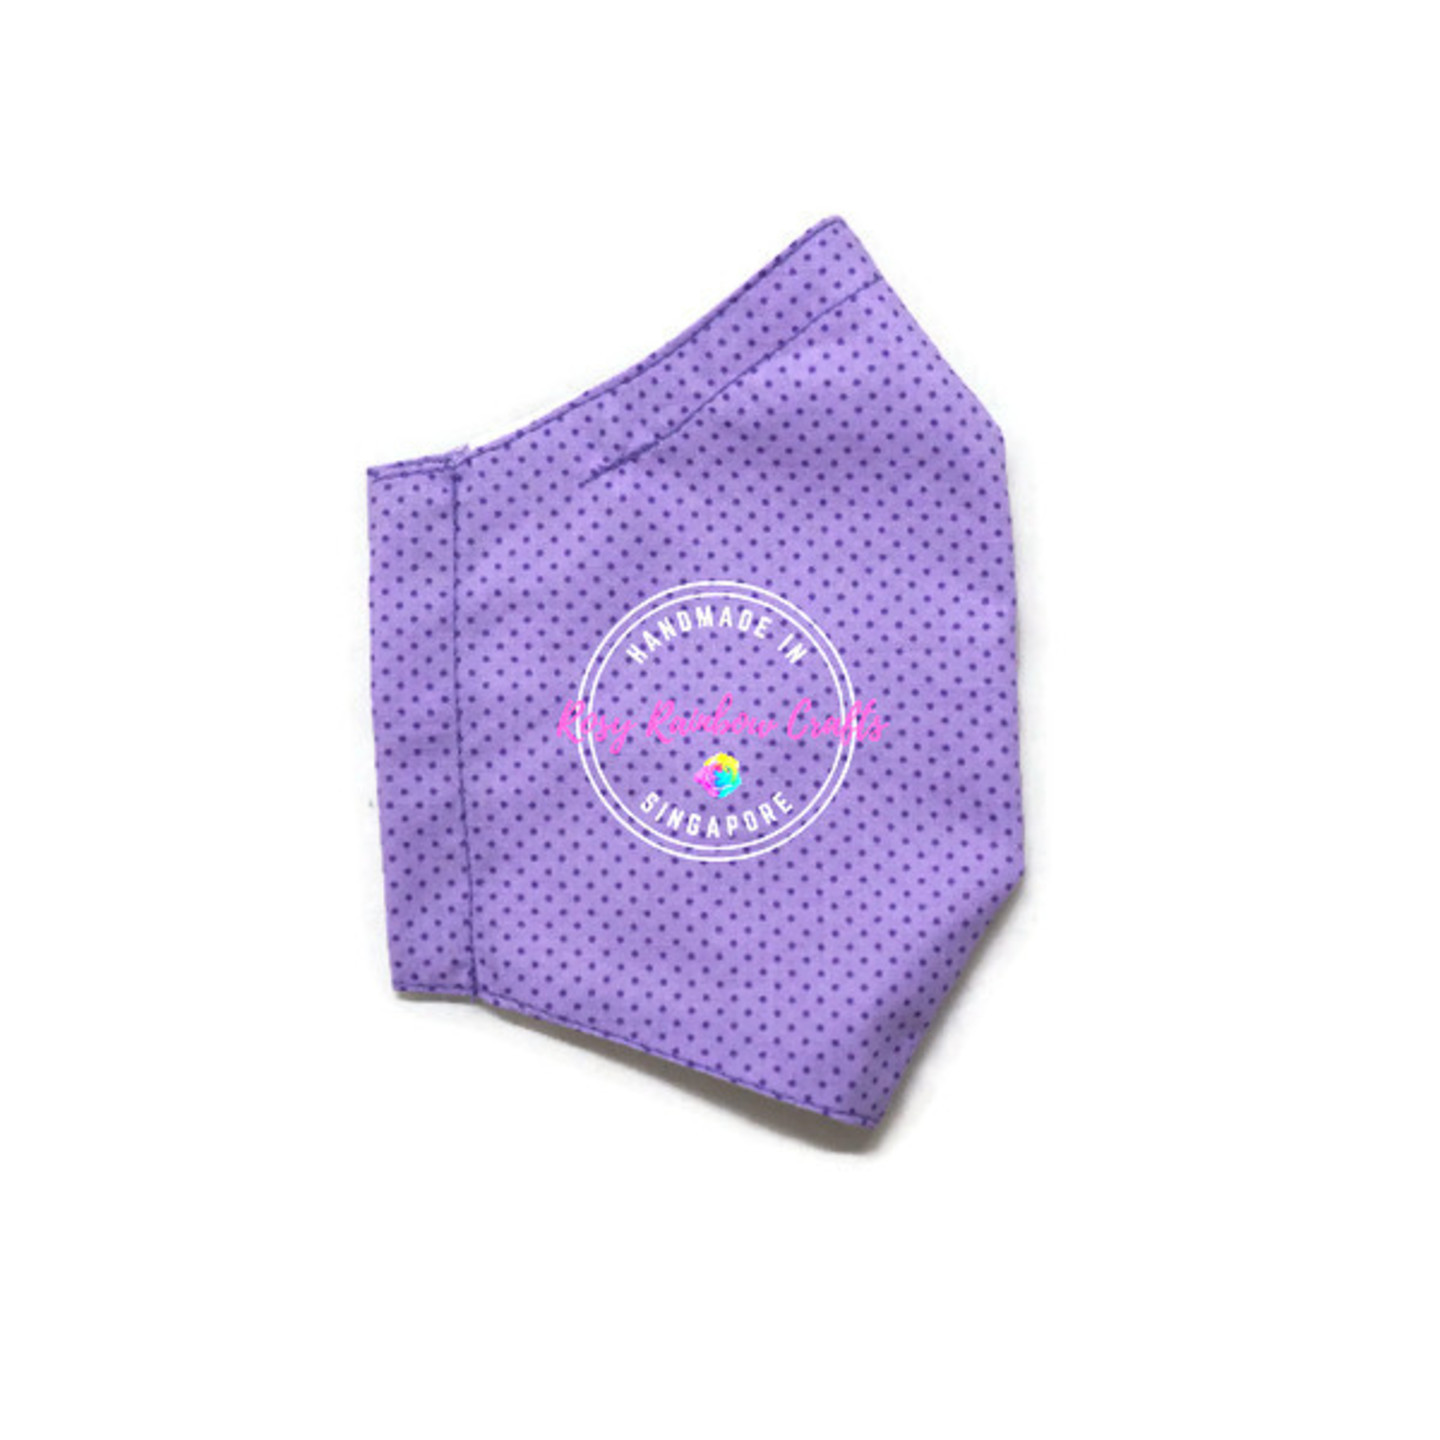 3D Seamless Mask Candy Purple Dots Small (4-7 years old)